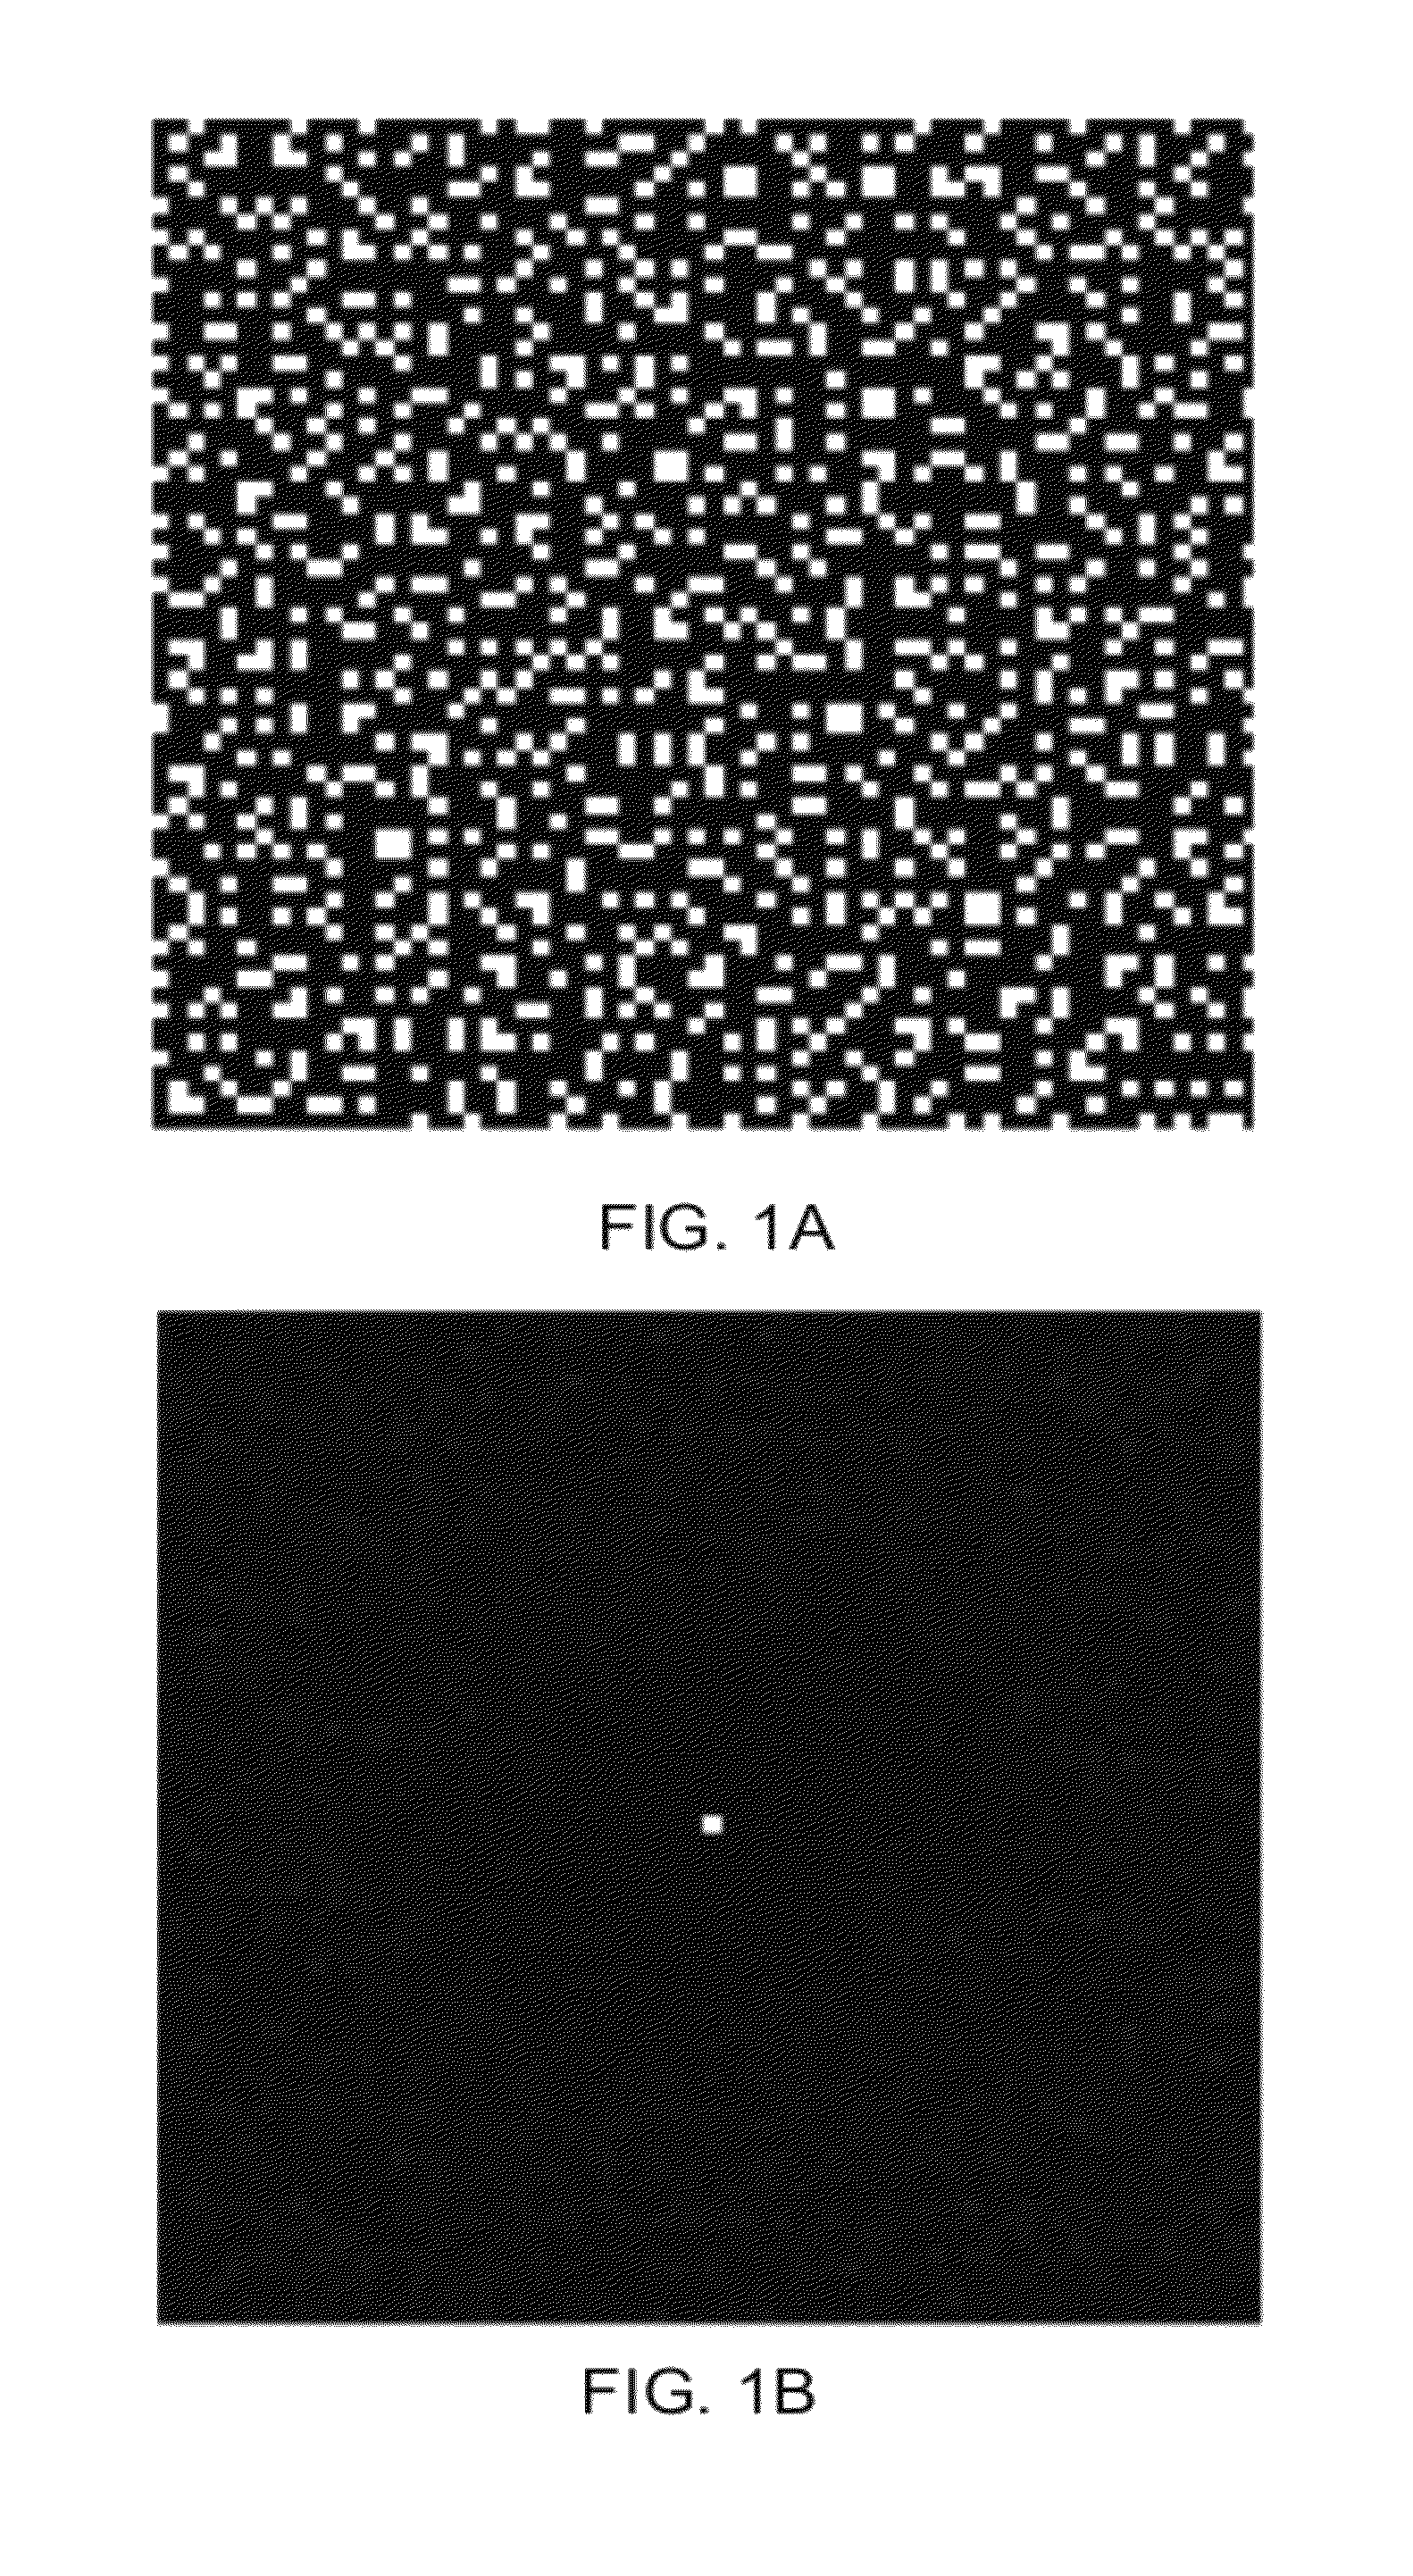 Method of autocalibrating parallel imaging interpolation from arbitrary K-space sampling with noise correlations weighted to reduce noise of reconstructed images